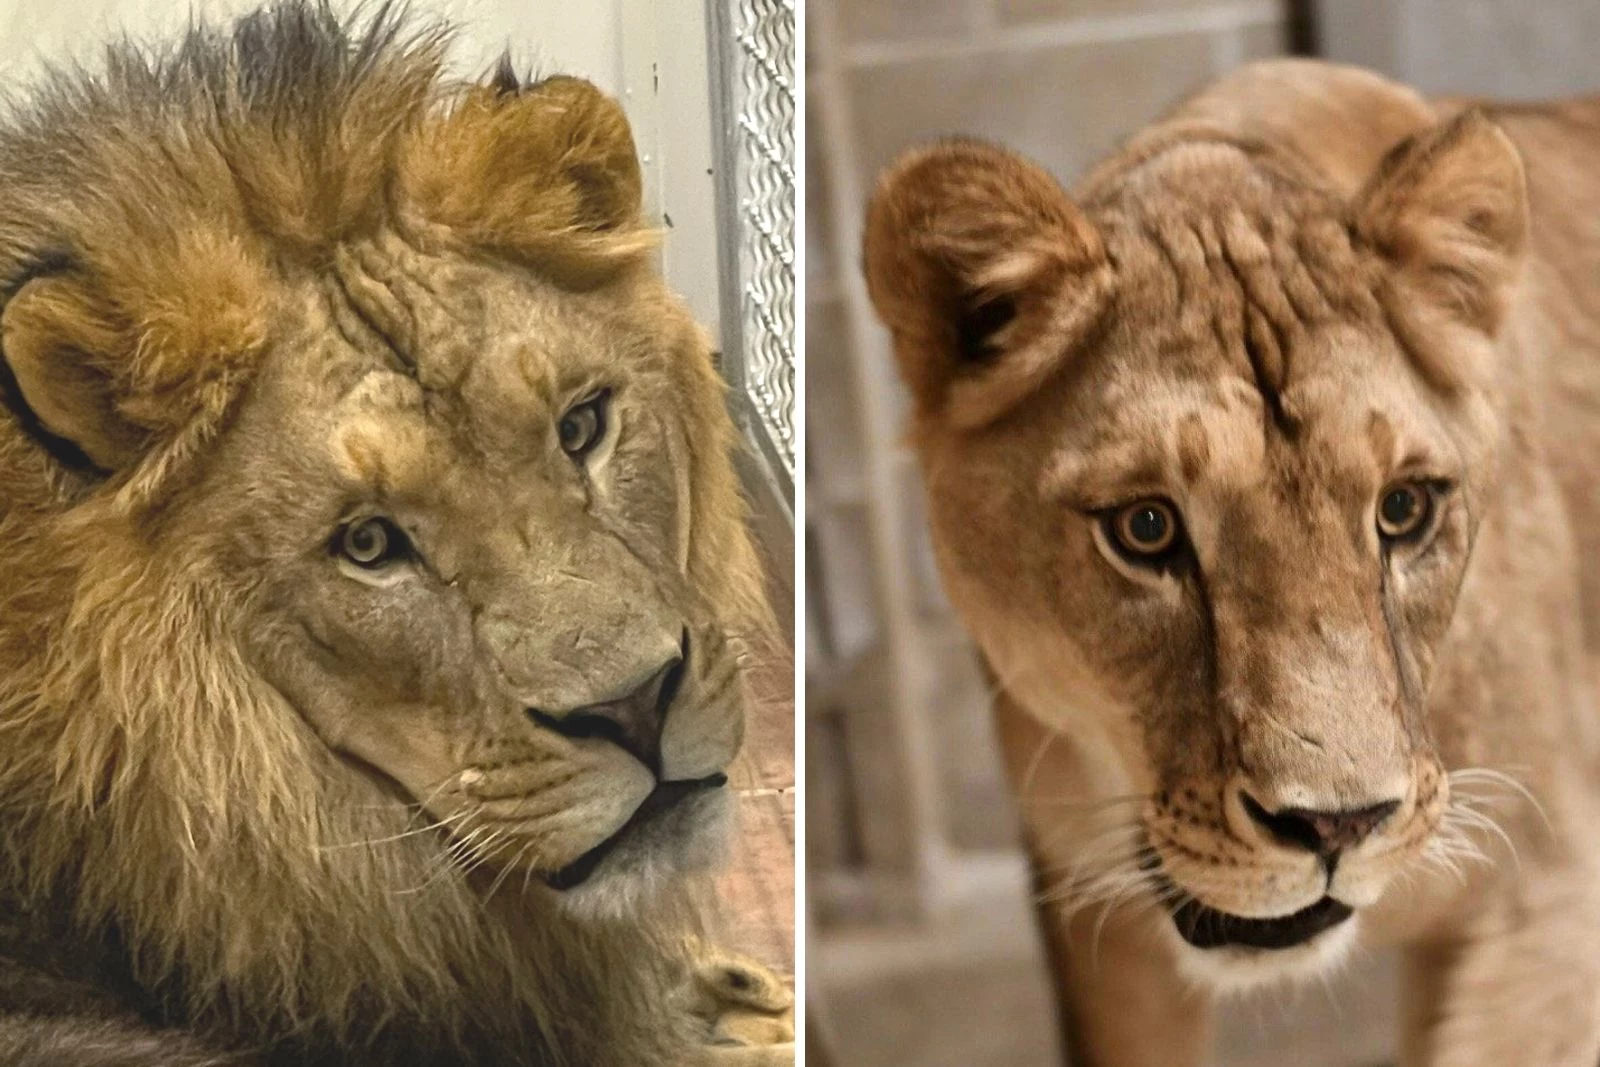 Popcorn Park Zoo welcomes new lions, tigers to NJ from Canada pic